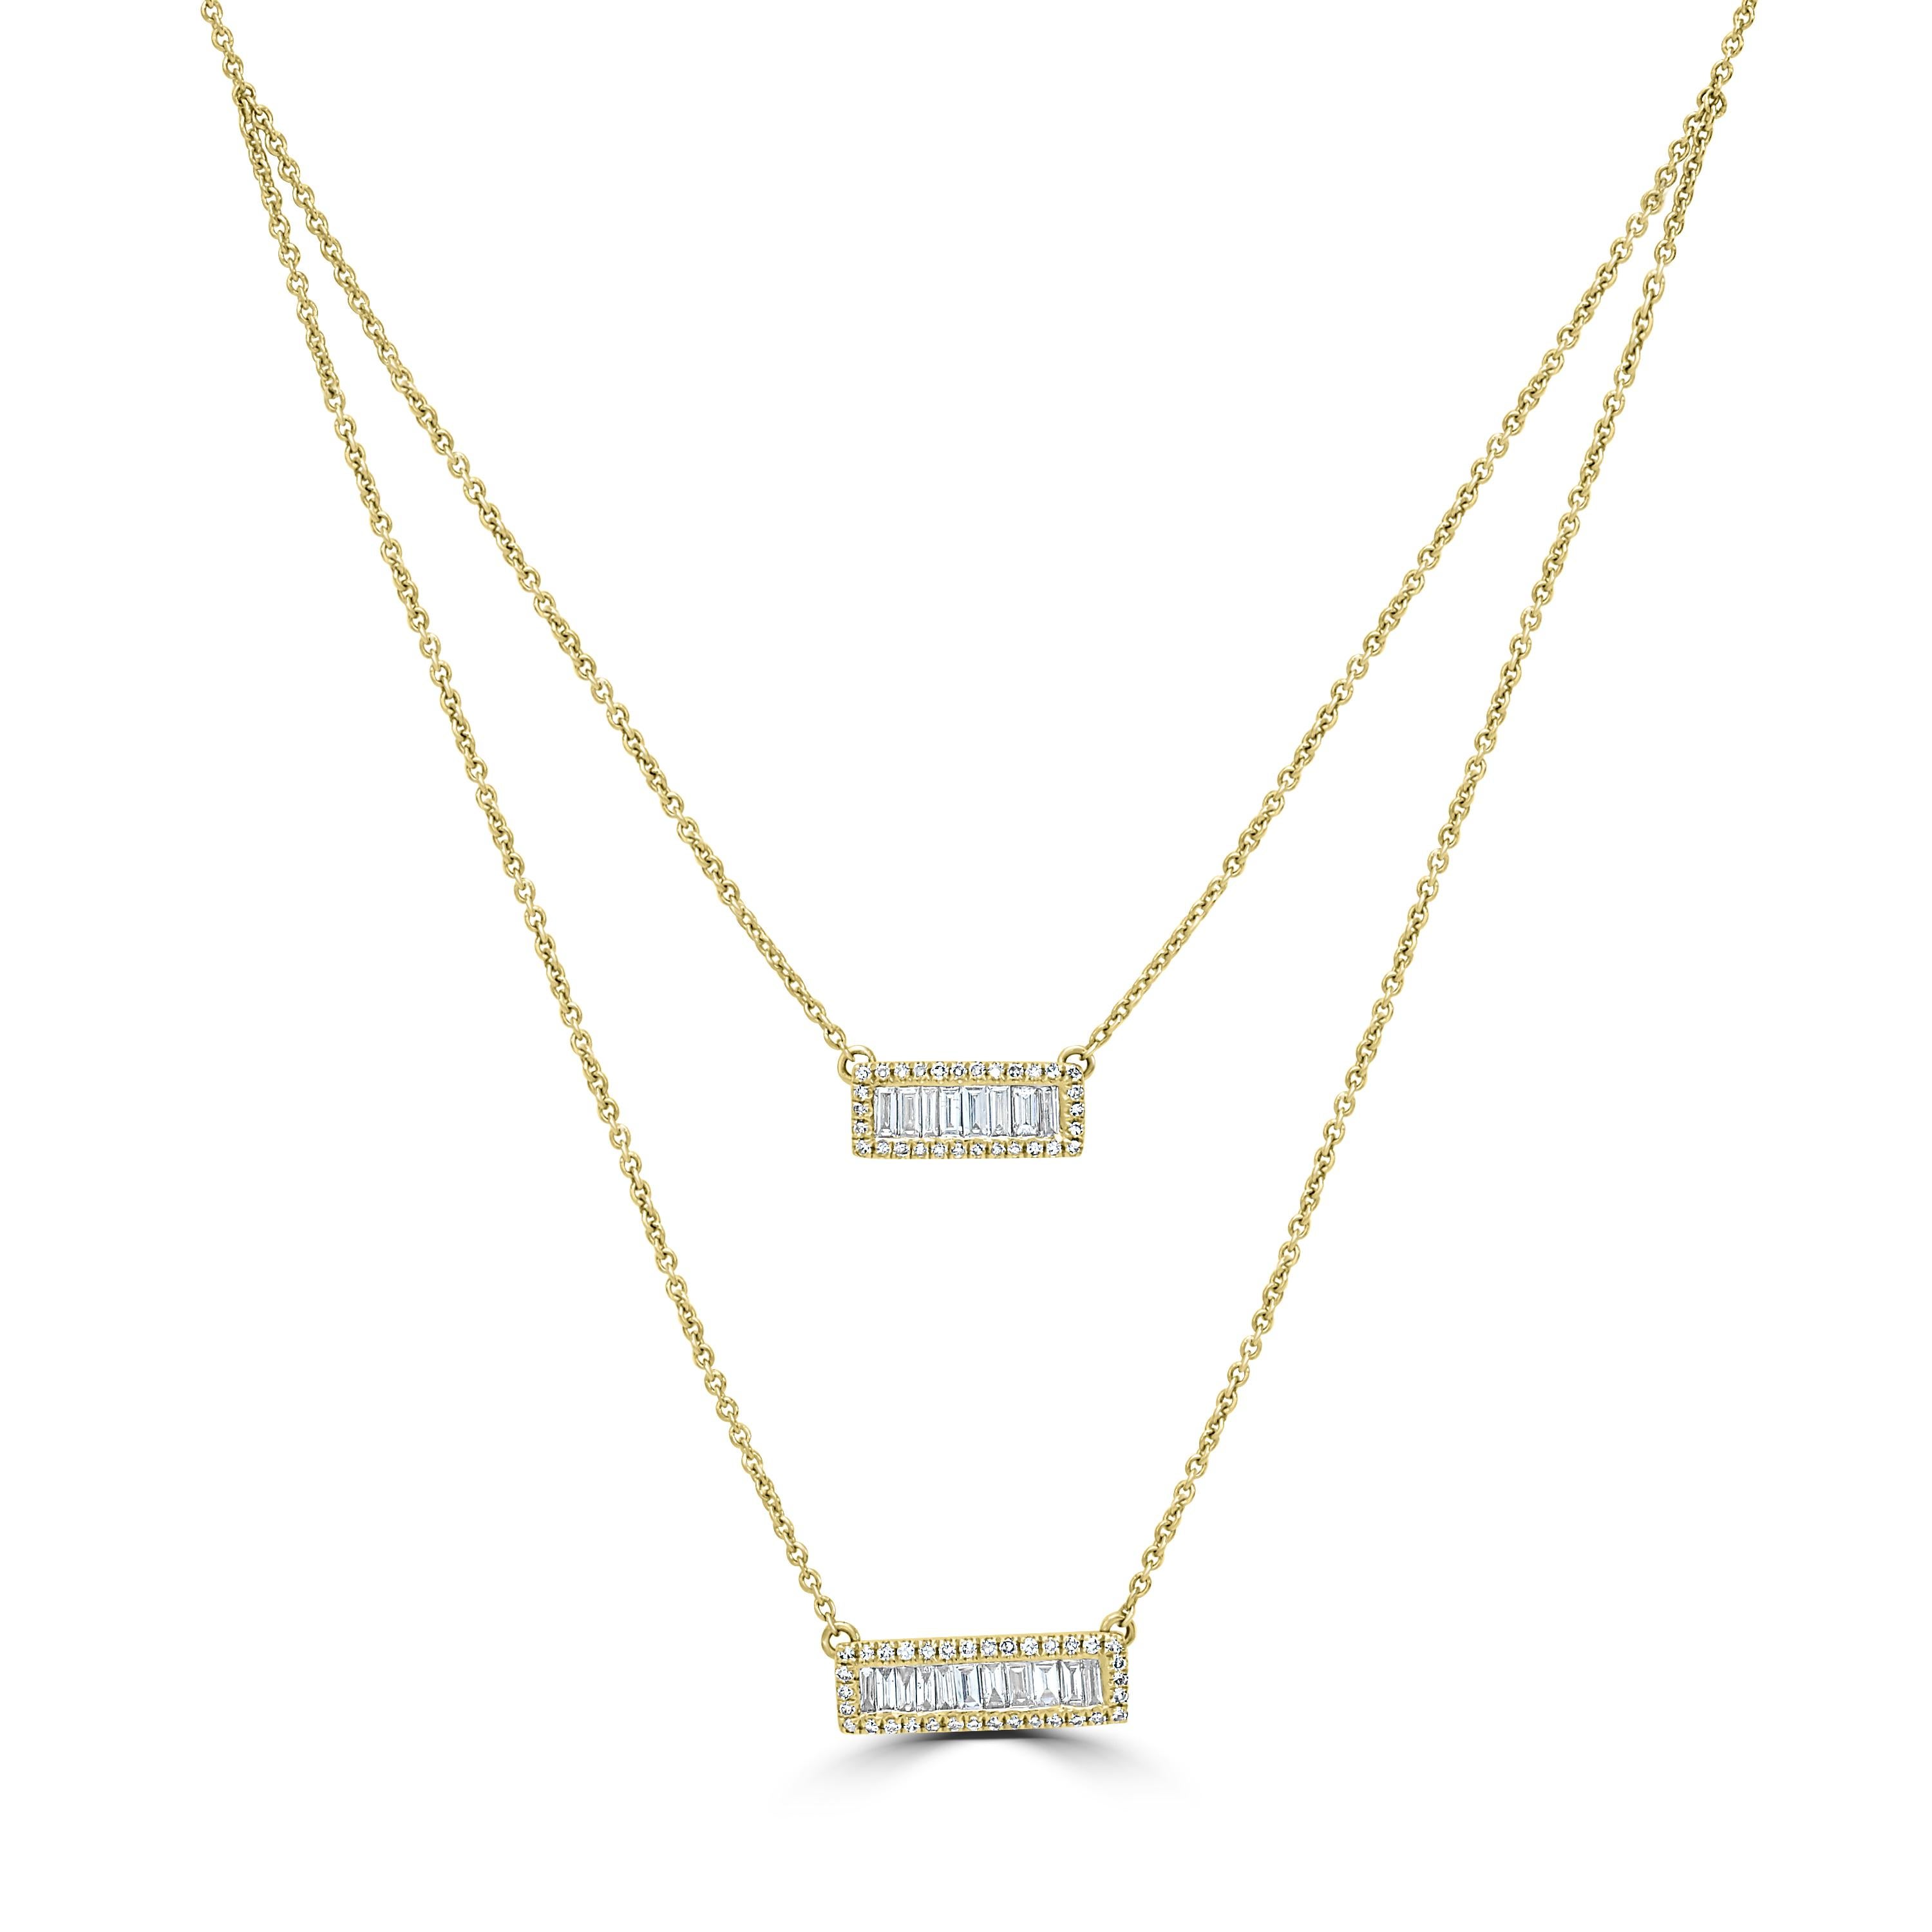 Expect compliments when you wear this Luxle diamond double-strand bar necklace. Featuring 0.34 Cts baguette full-cut diamonds set in bars in the center make this necklace a work of art. The layers of this necklace glide effortlessly upon your